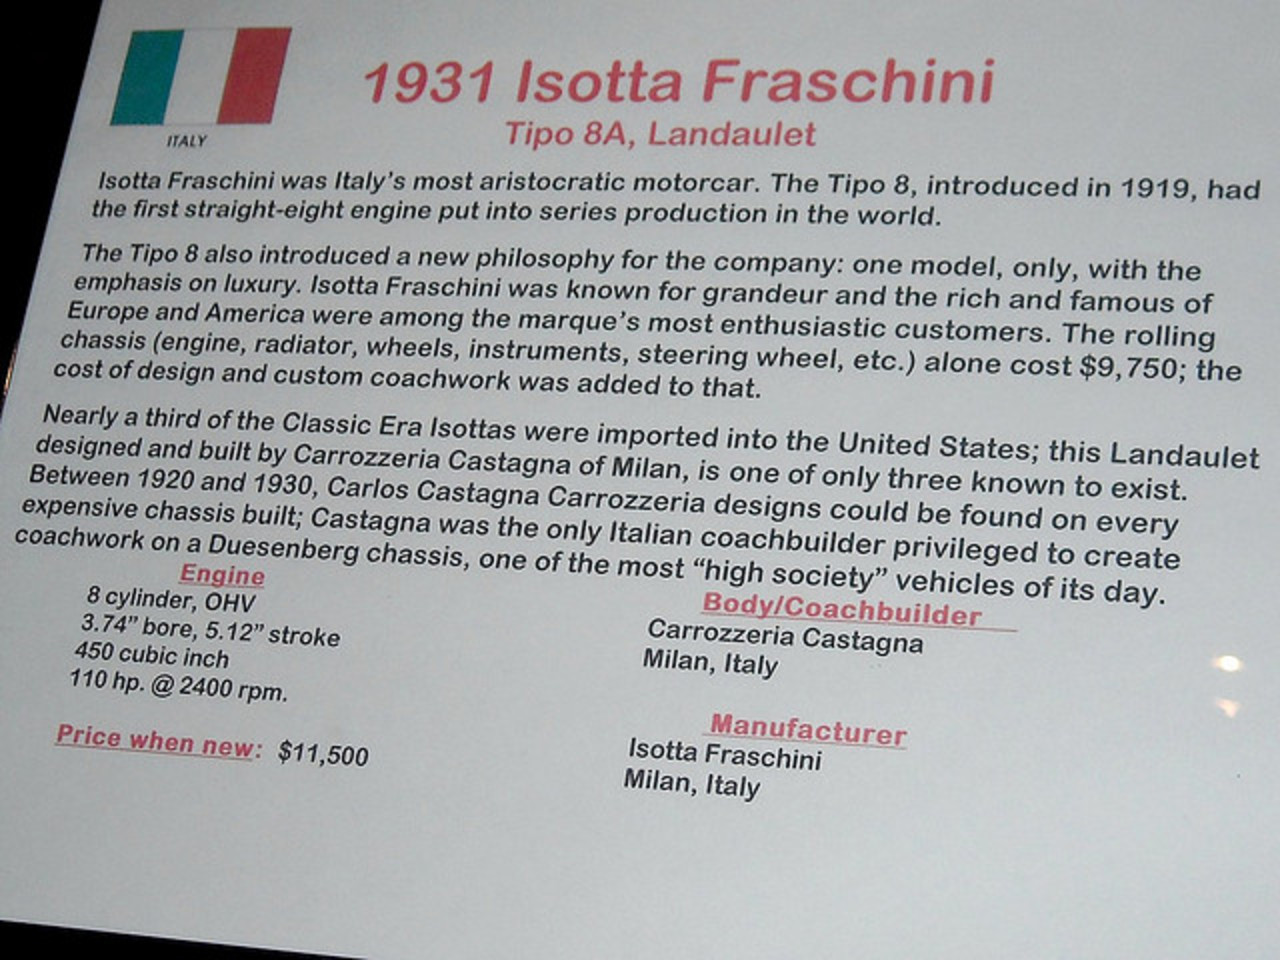 1931 Isotta Fraschini, Tipo 8A, Landaulet (The 1919 verion had the ...